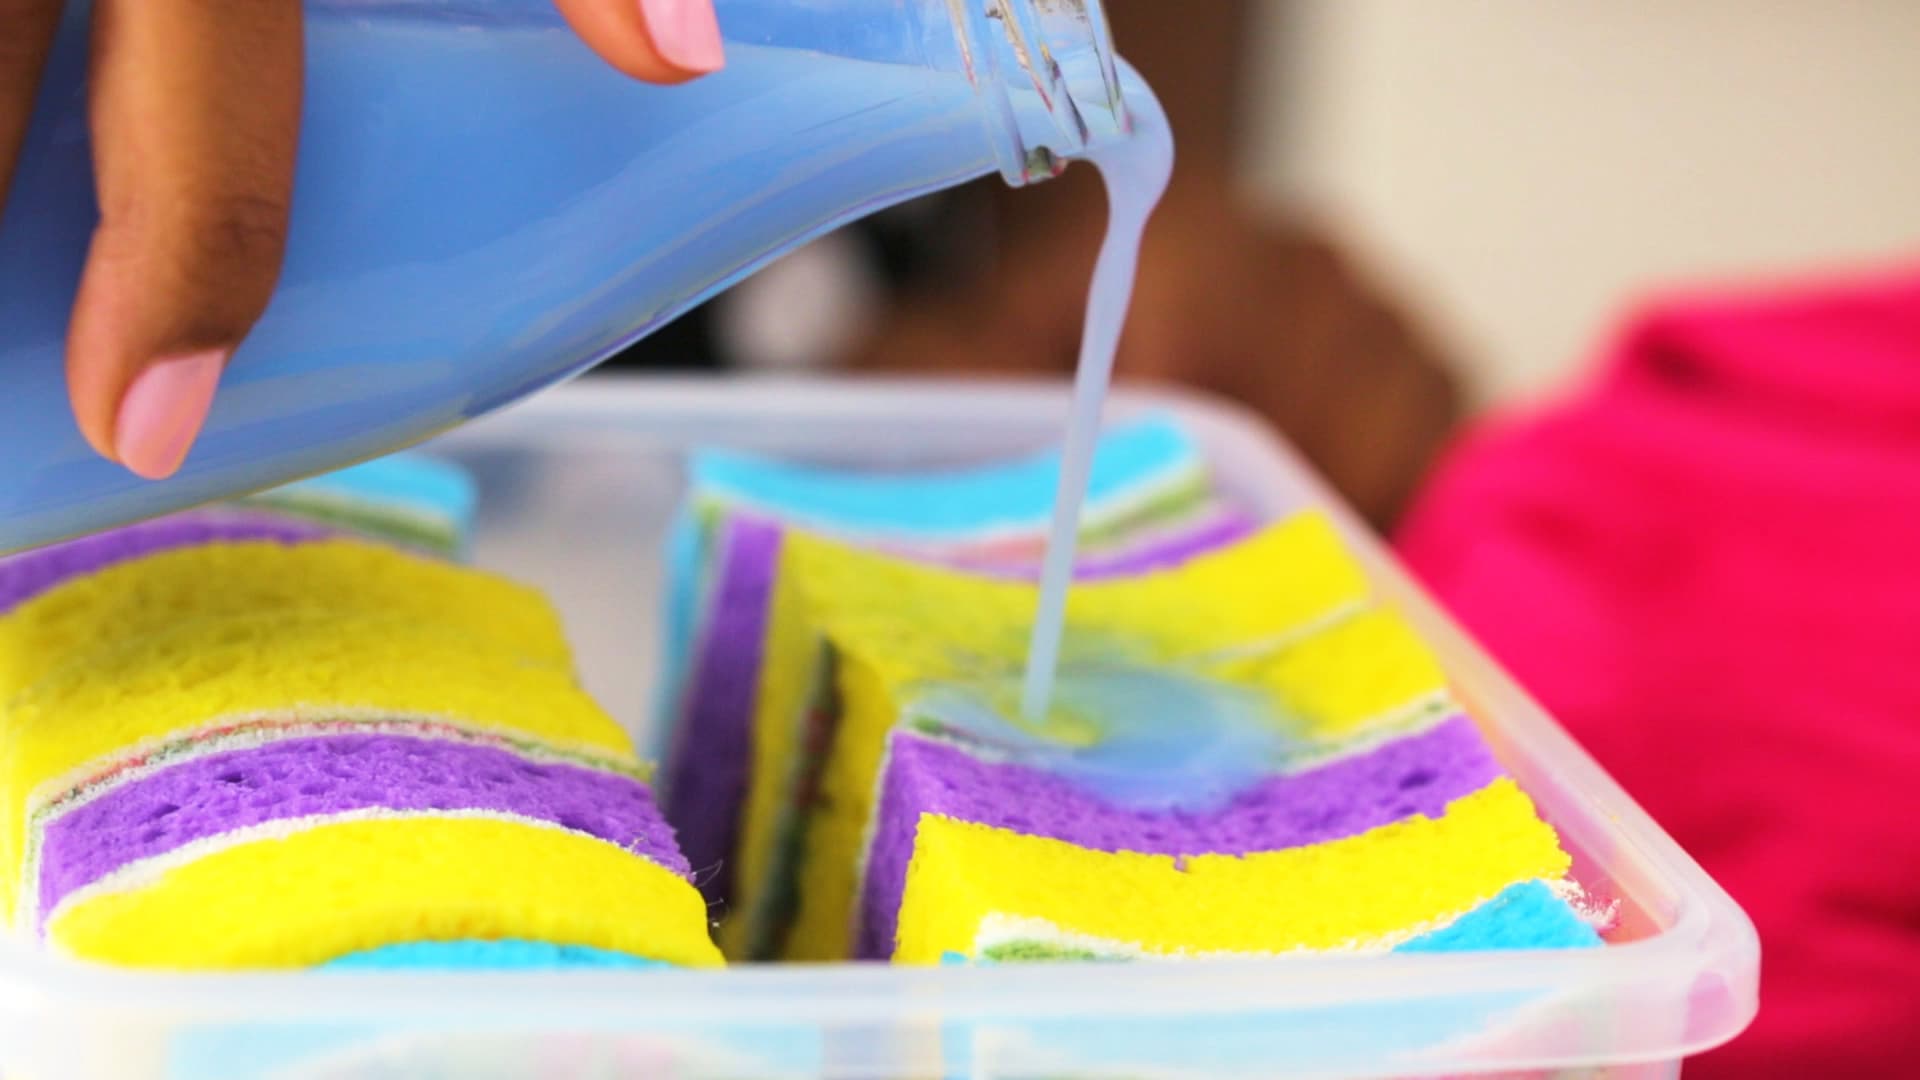 31 Cleaning Sponge Hacks that are Insanely Useful (And That Work) - Sponge  Hacks